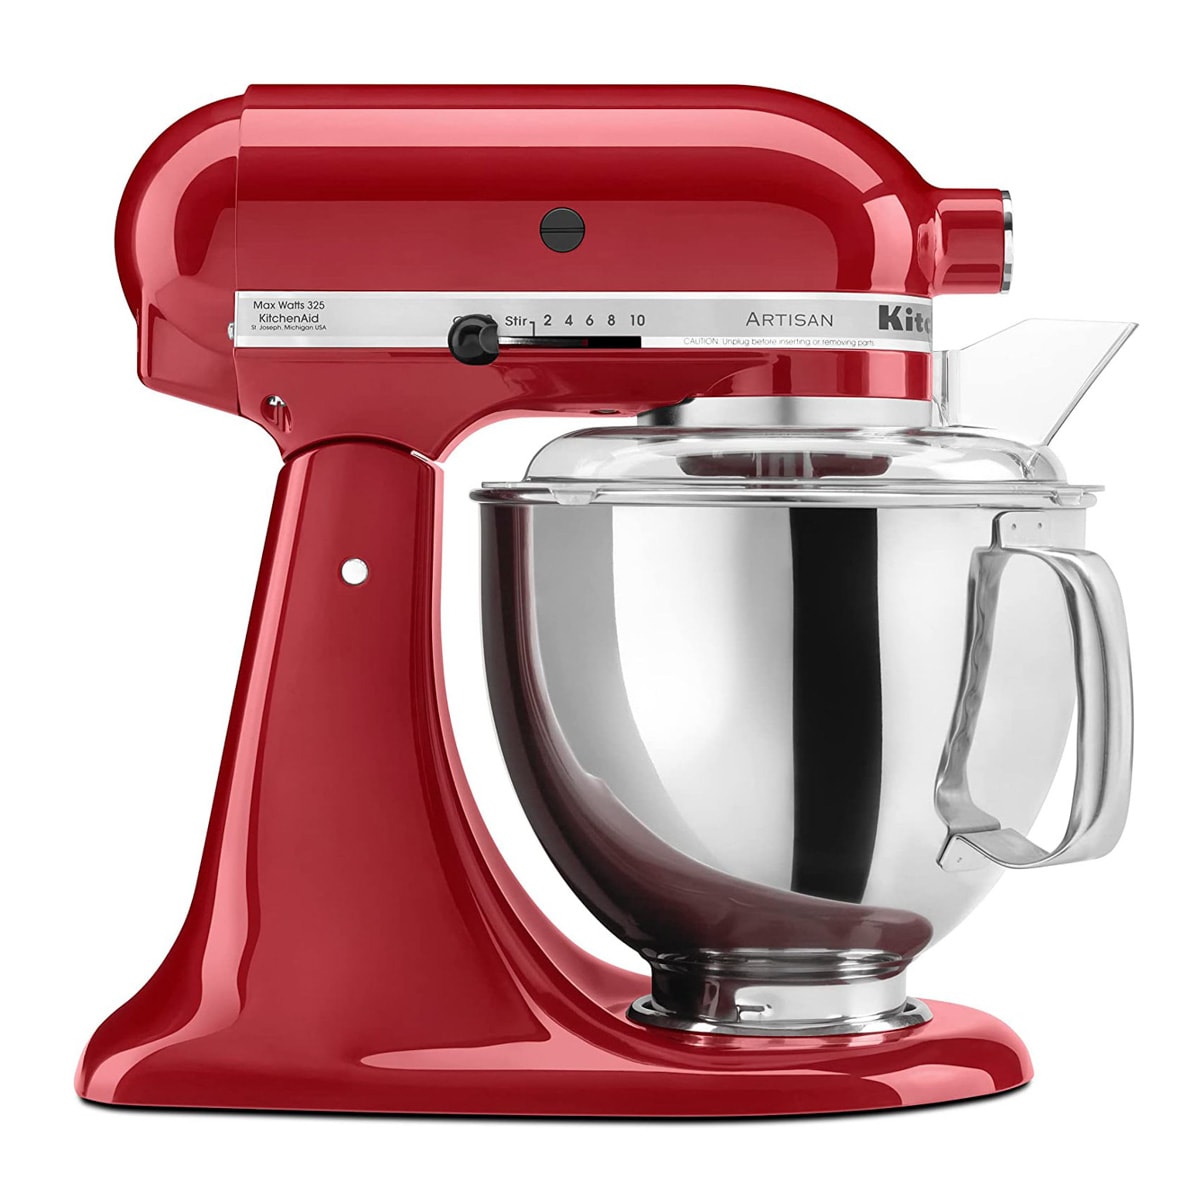 A red KitchenAid stand mixer.